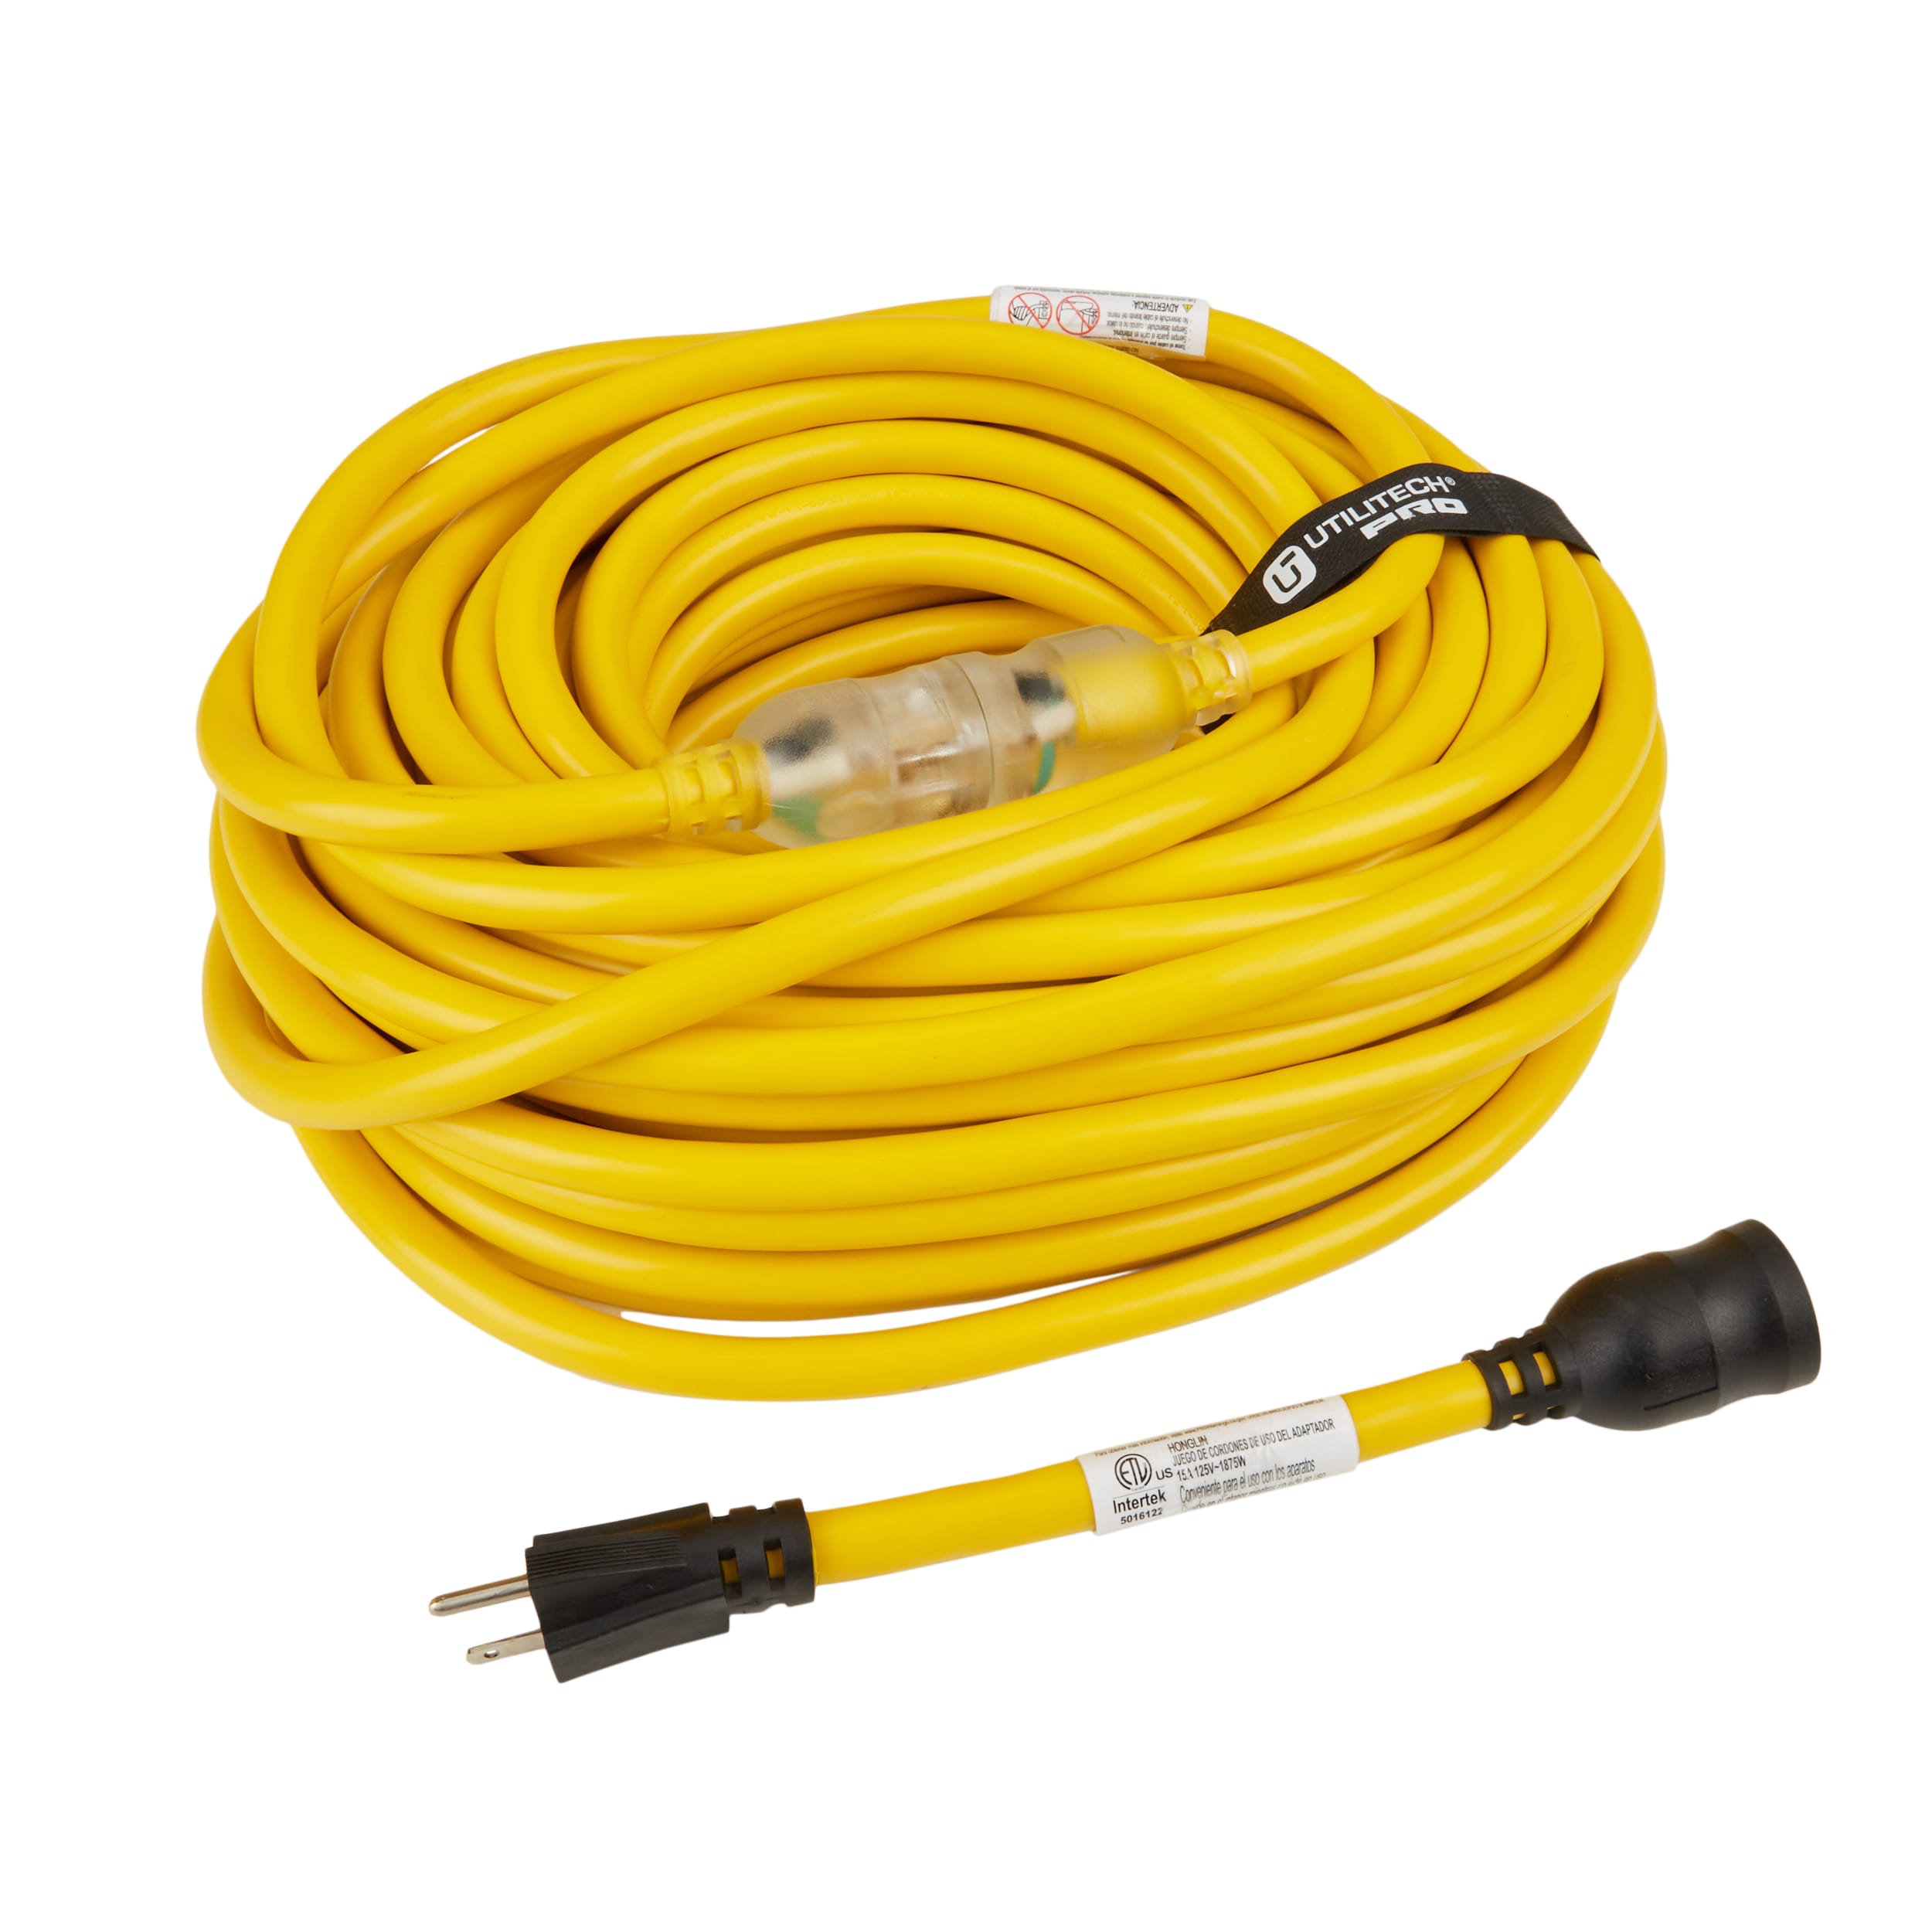 Extra Heavy-Duty Extension Cord W/ Lighted End #73348 